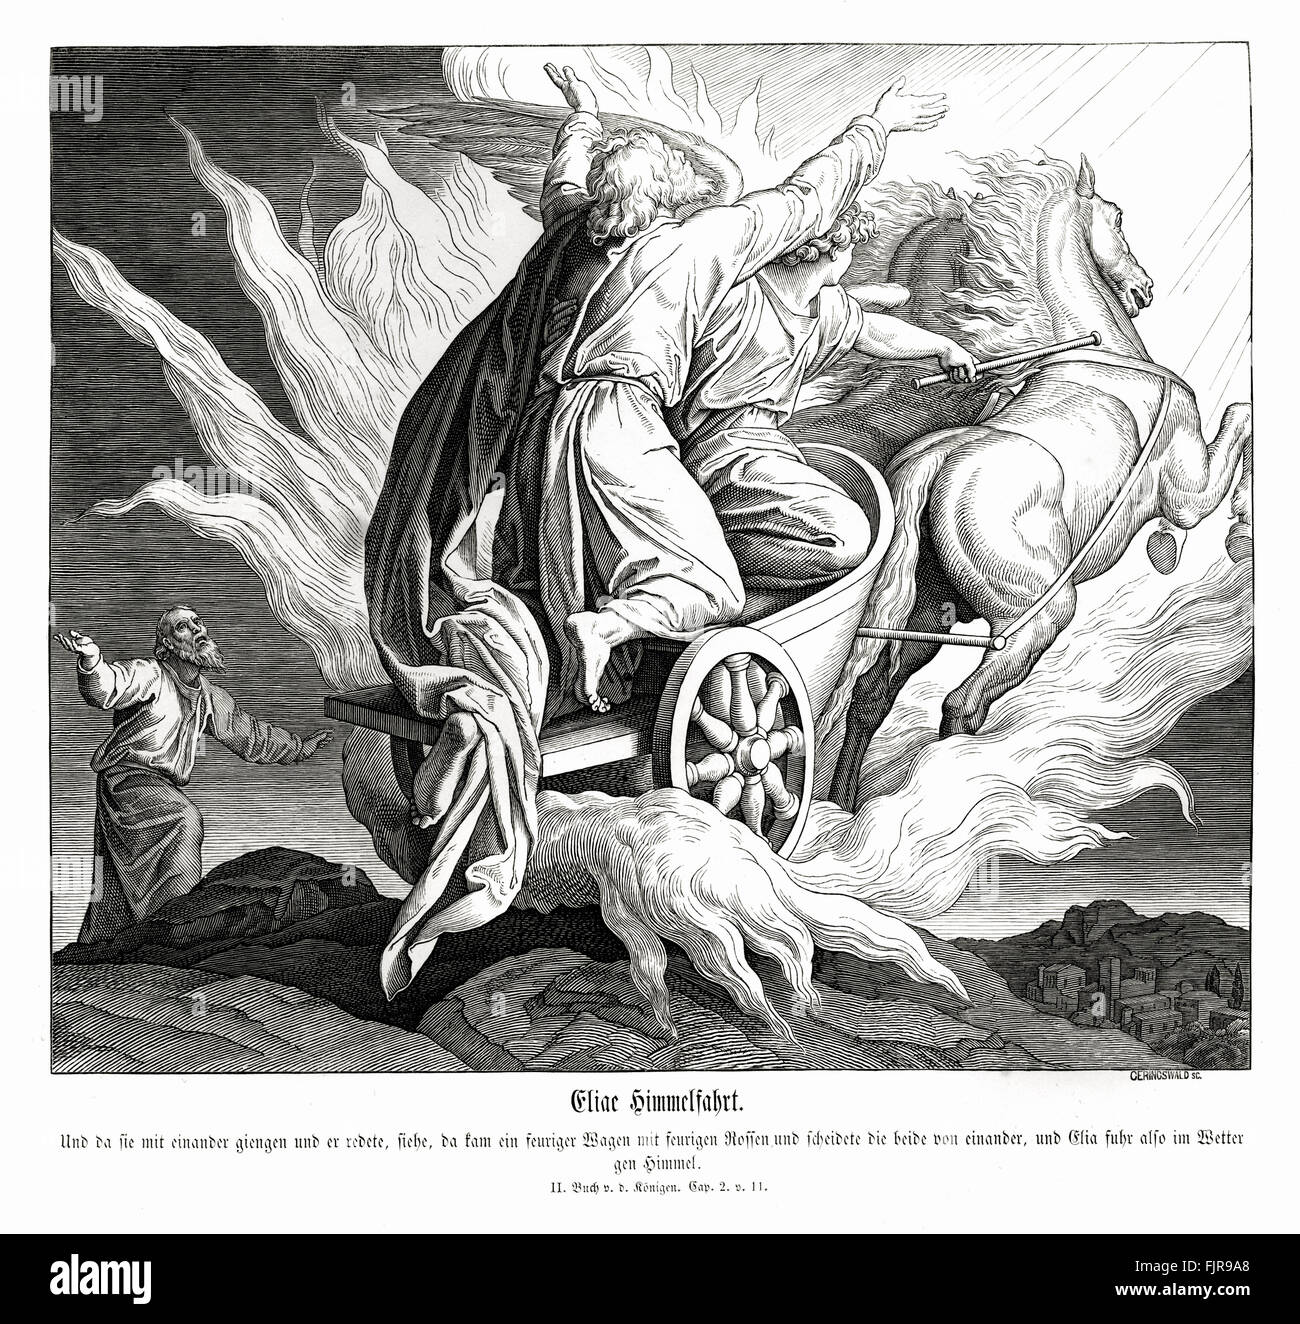 Elijah's ascension, 2 Kings chapter II verse 11 'And it came to pass, as they still went on, and talked, that, behold, there appeared a chariot of fire, and horses of fire, and parted them both asunder; and Elijah went up by a whirlwind into heaven.' 1852-60 illustration by Julius Schnorr von Carolsfeld Stock Photo